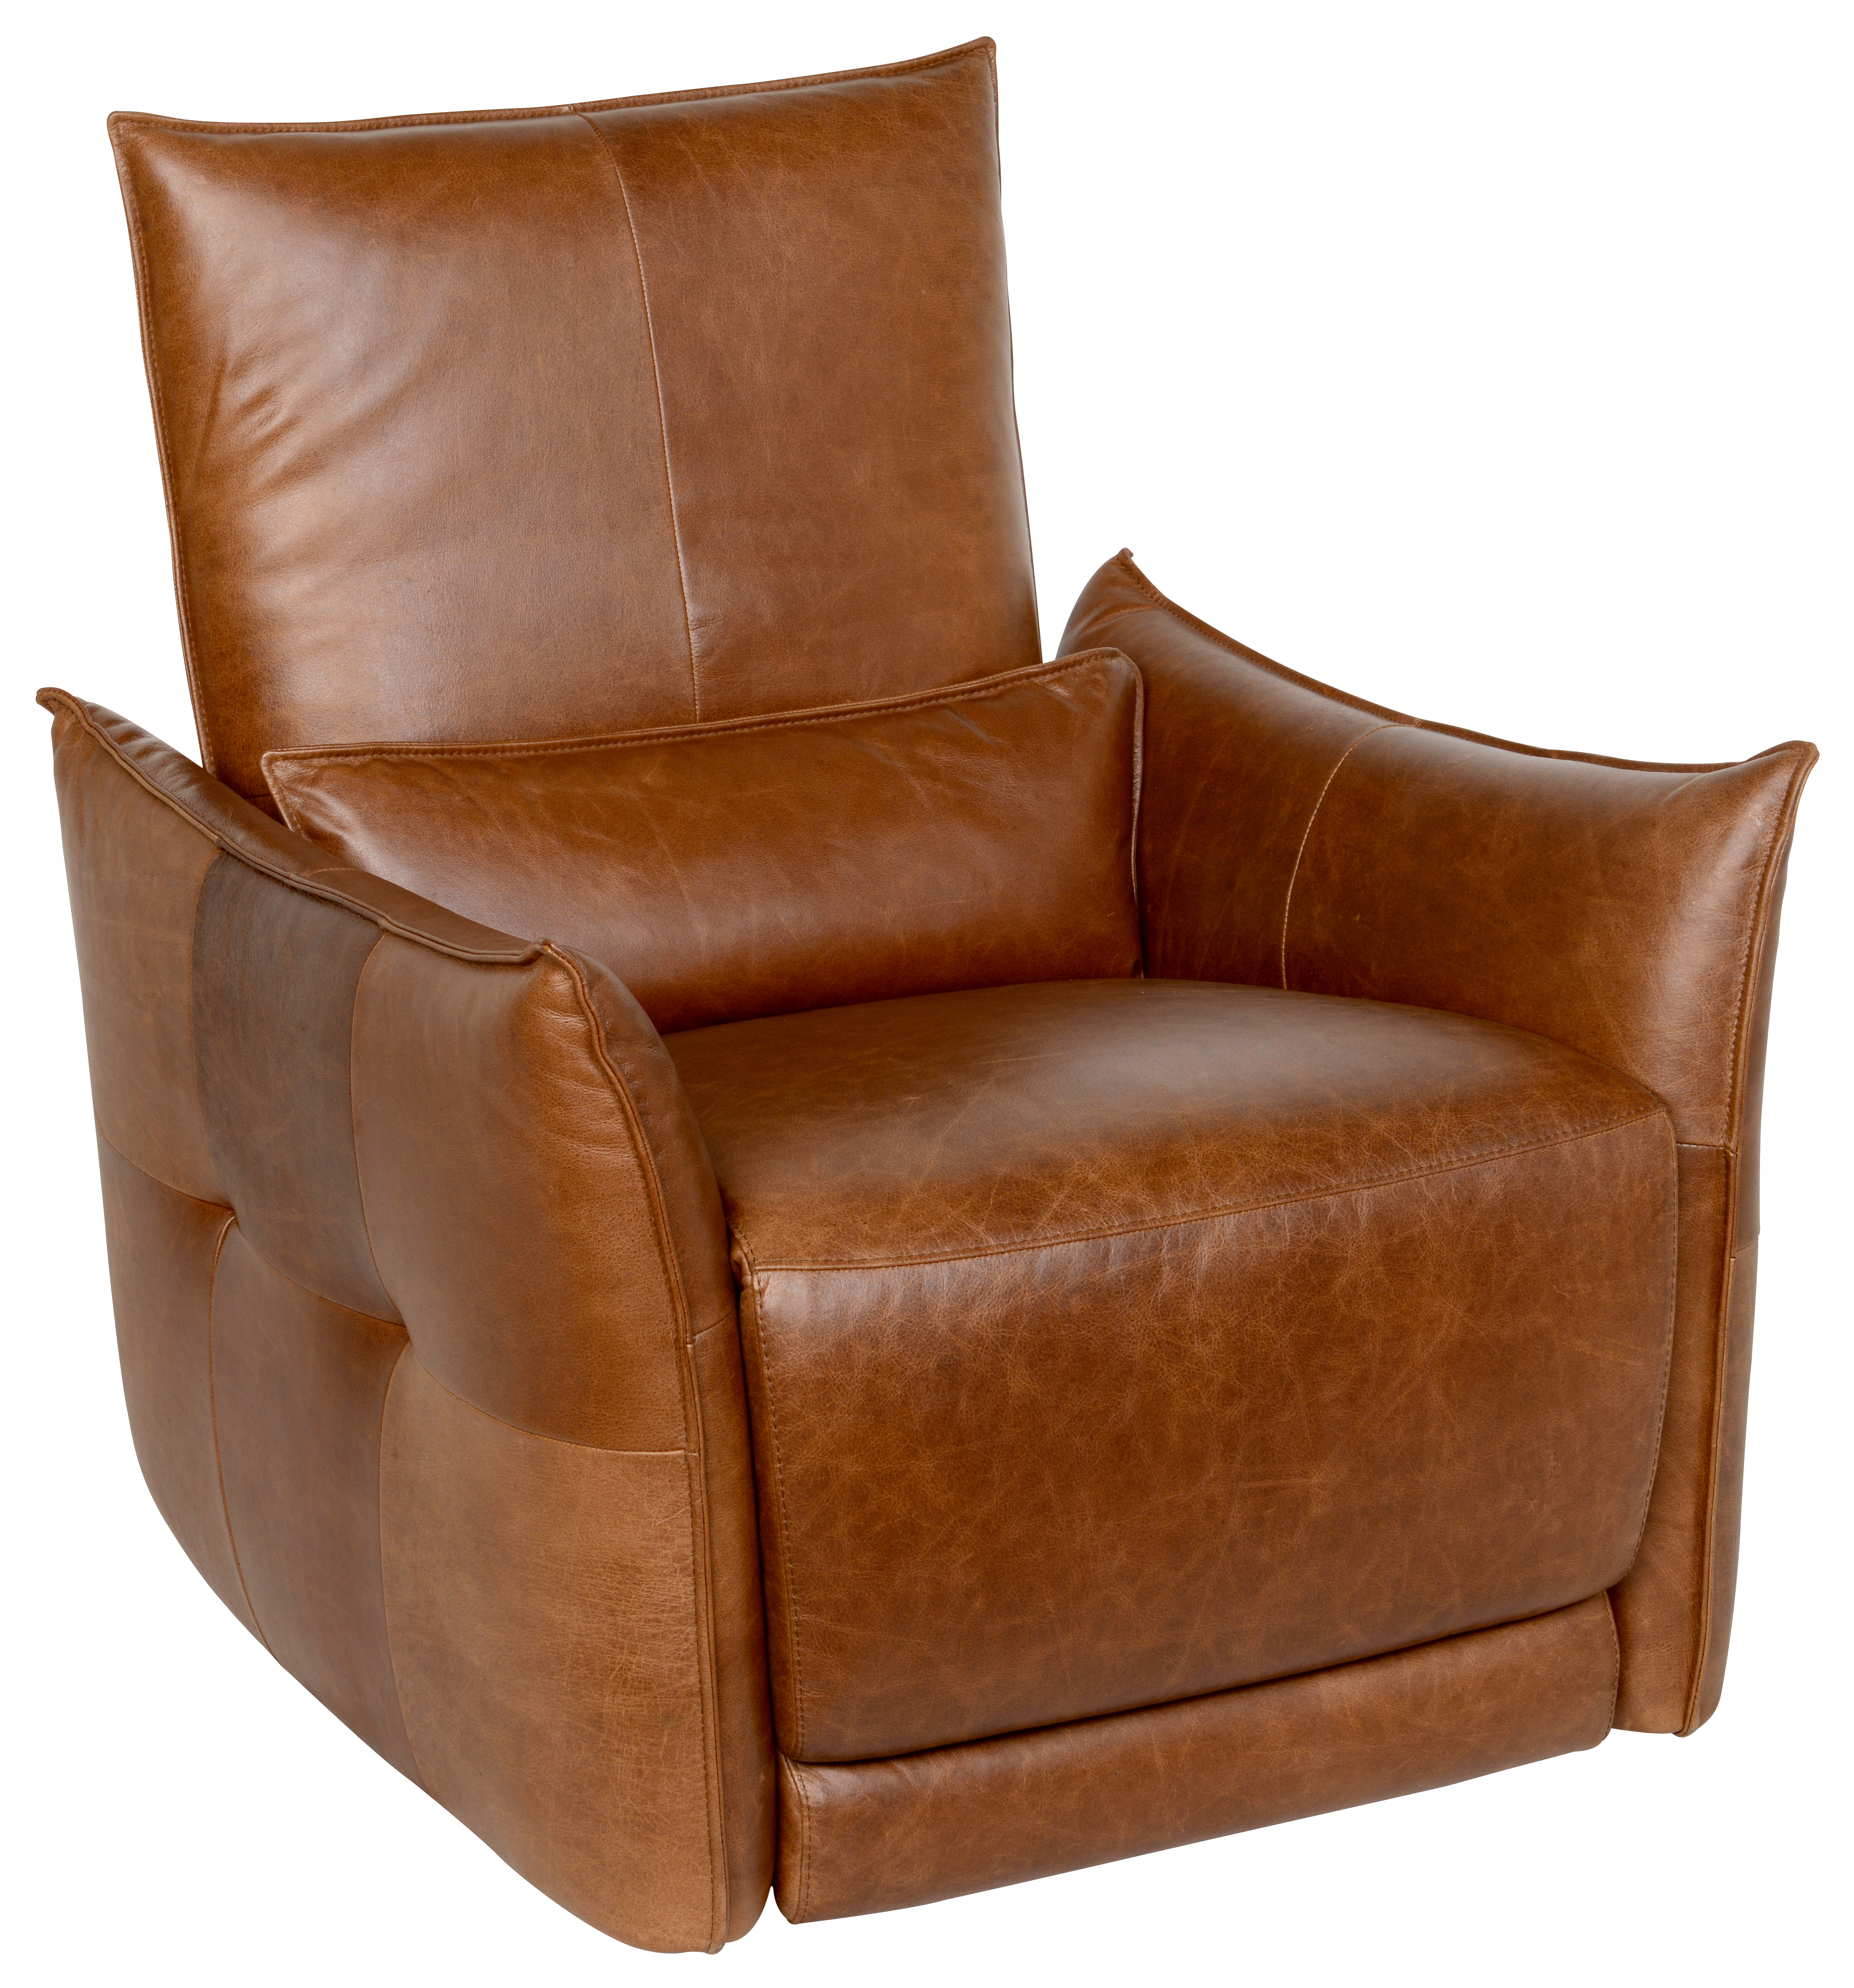 The Amsterdam Recliner